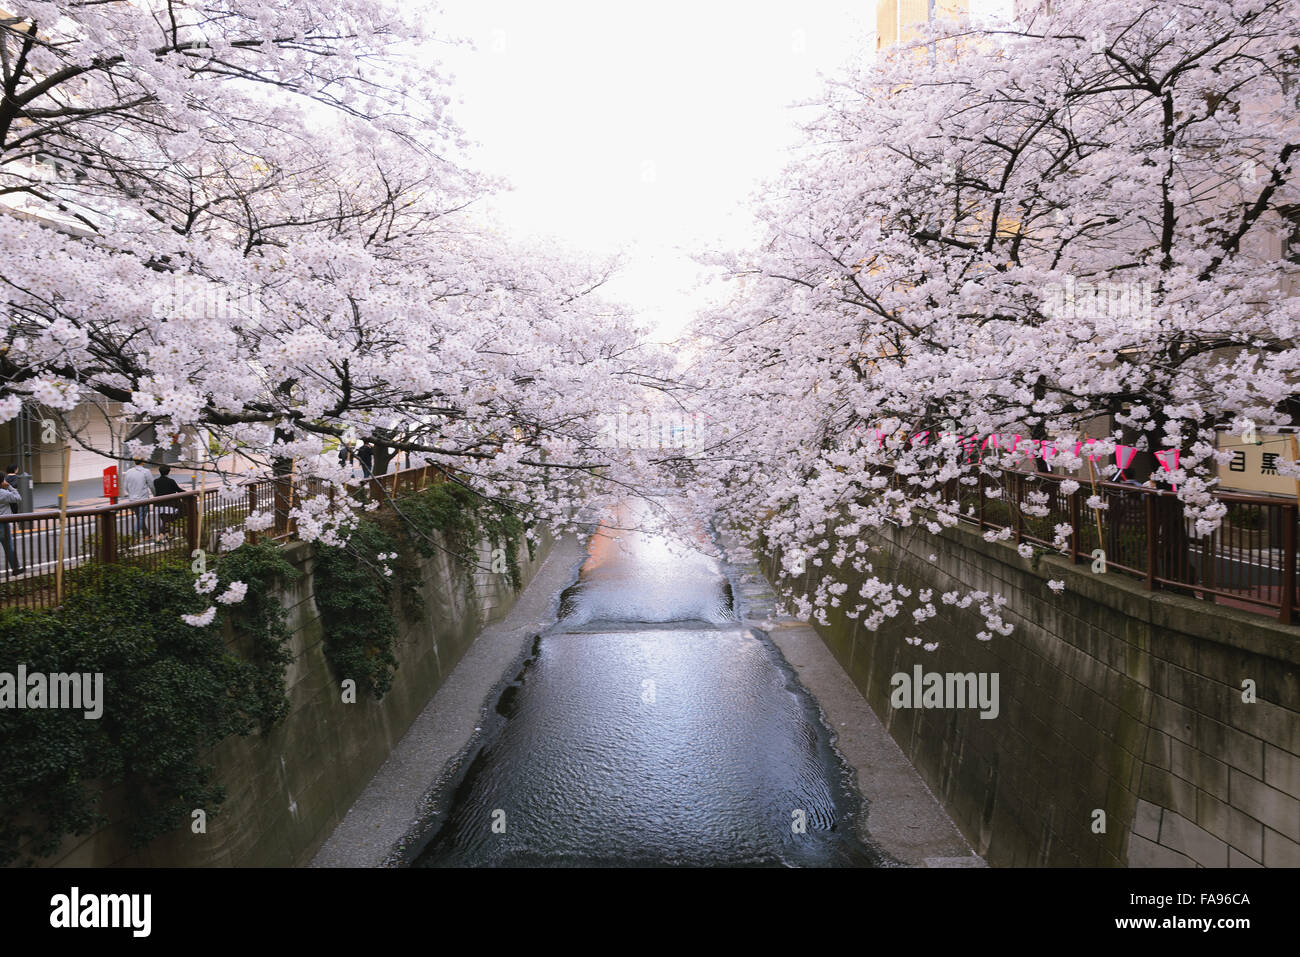 Cherry blossoms in full bloom at Meguro river, Tokyo, Japan Stock Photo